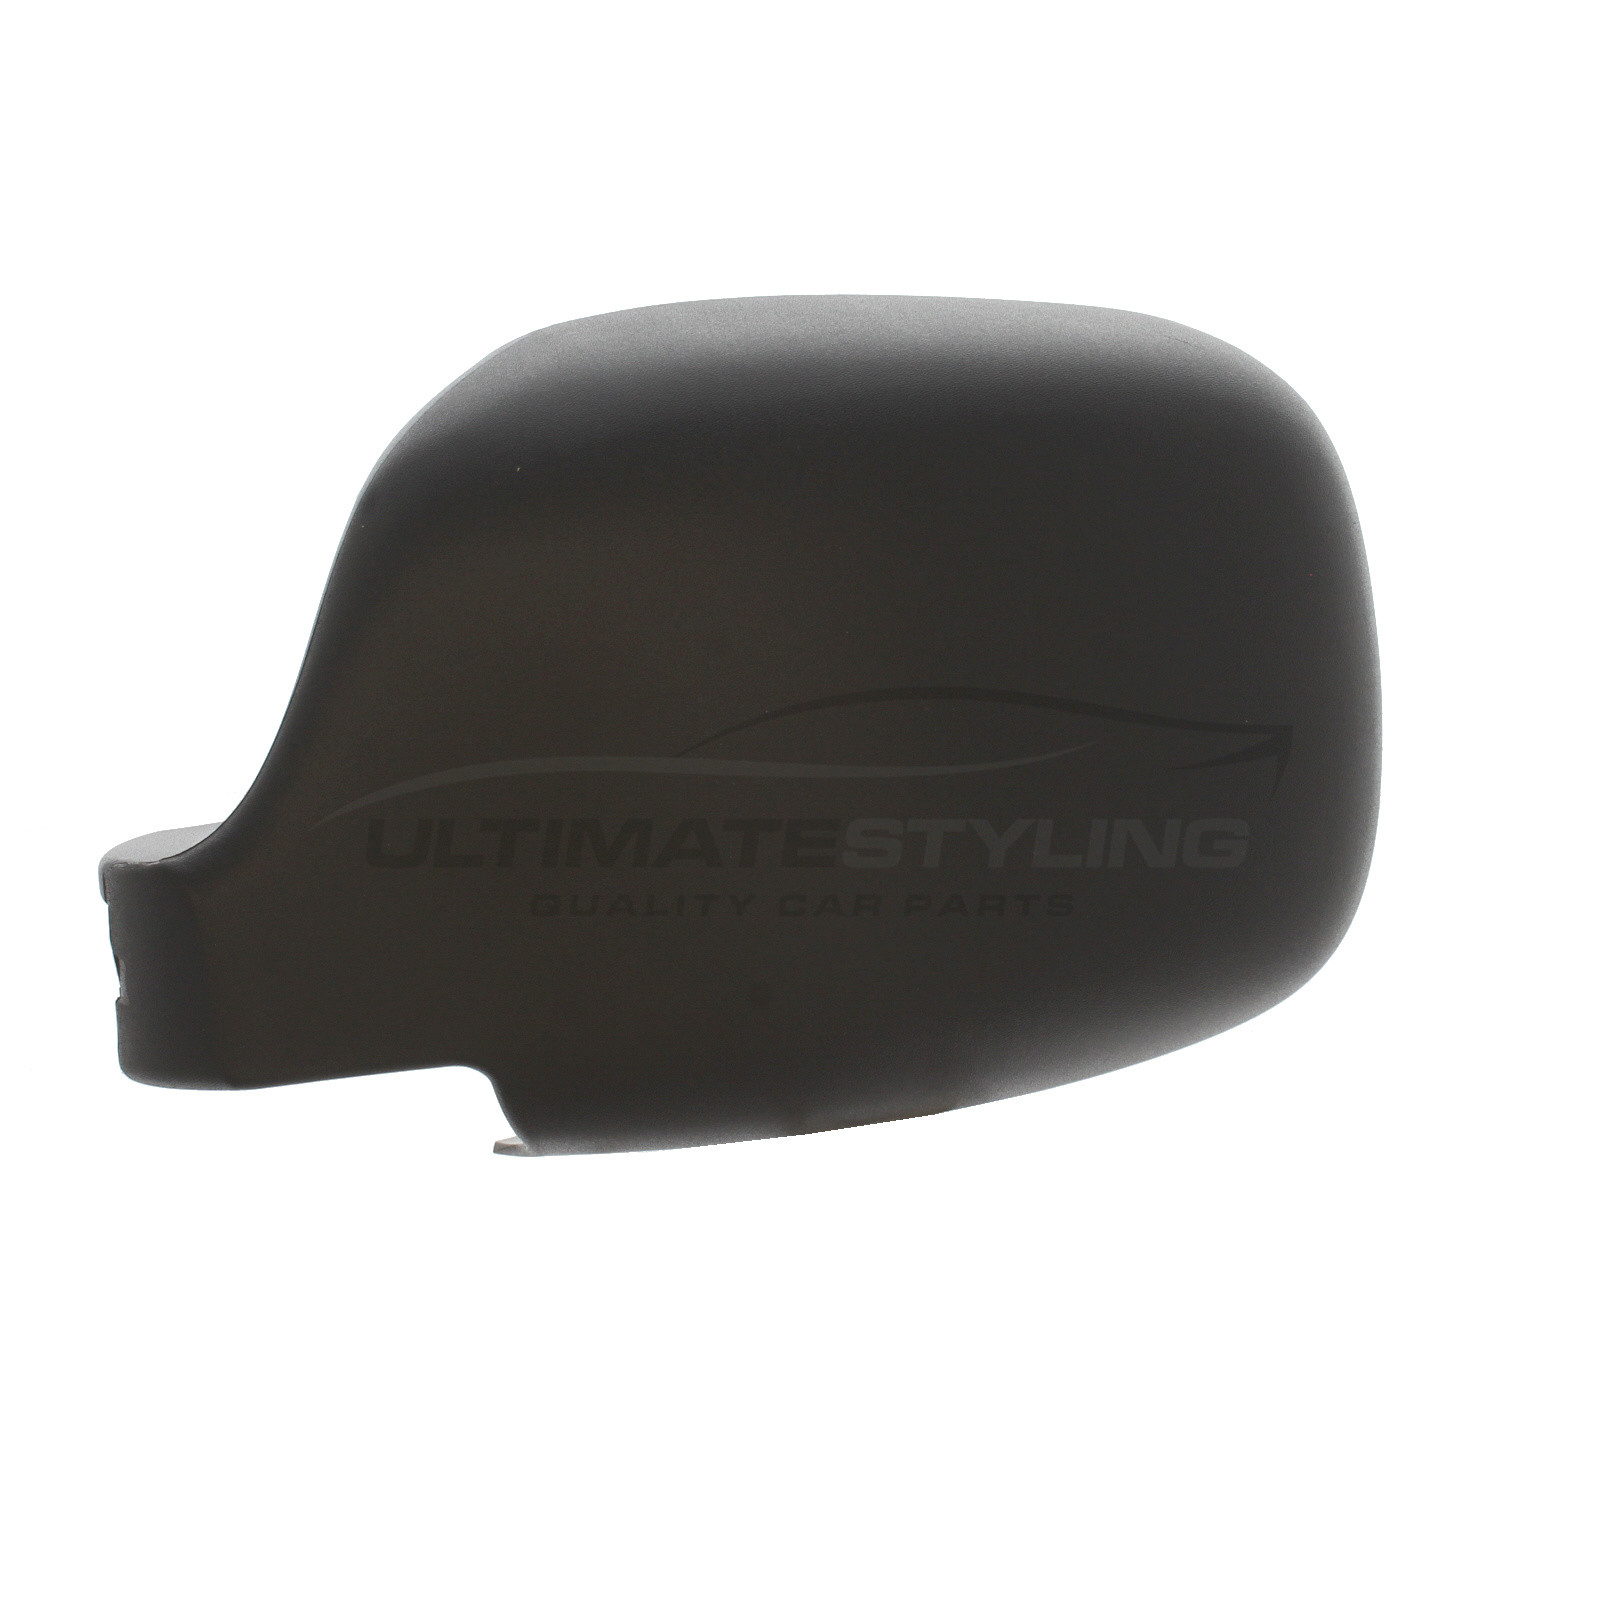 Details about   Right Side Wing Mirror Cover Primed Casing For Nissan Kubistar Renault Kangoo